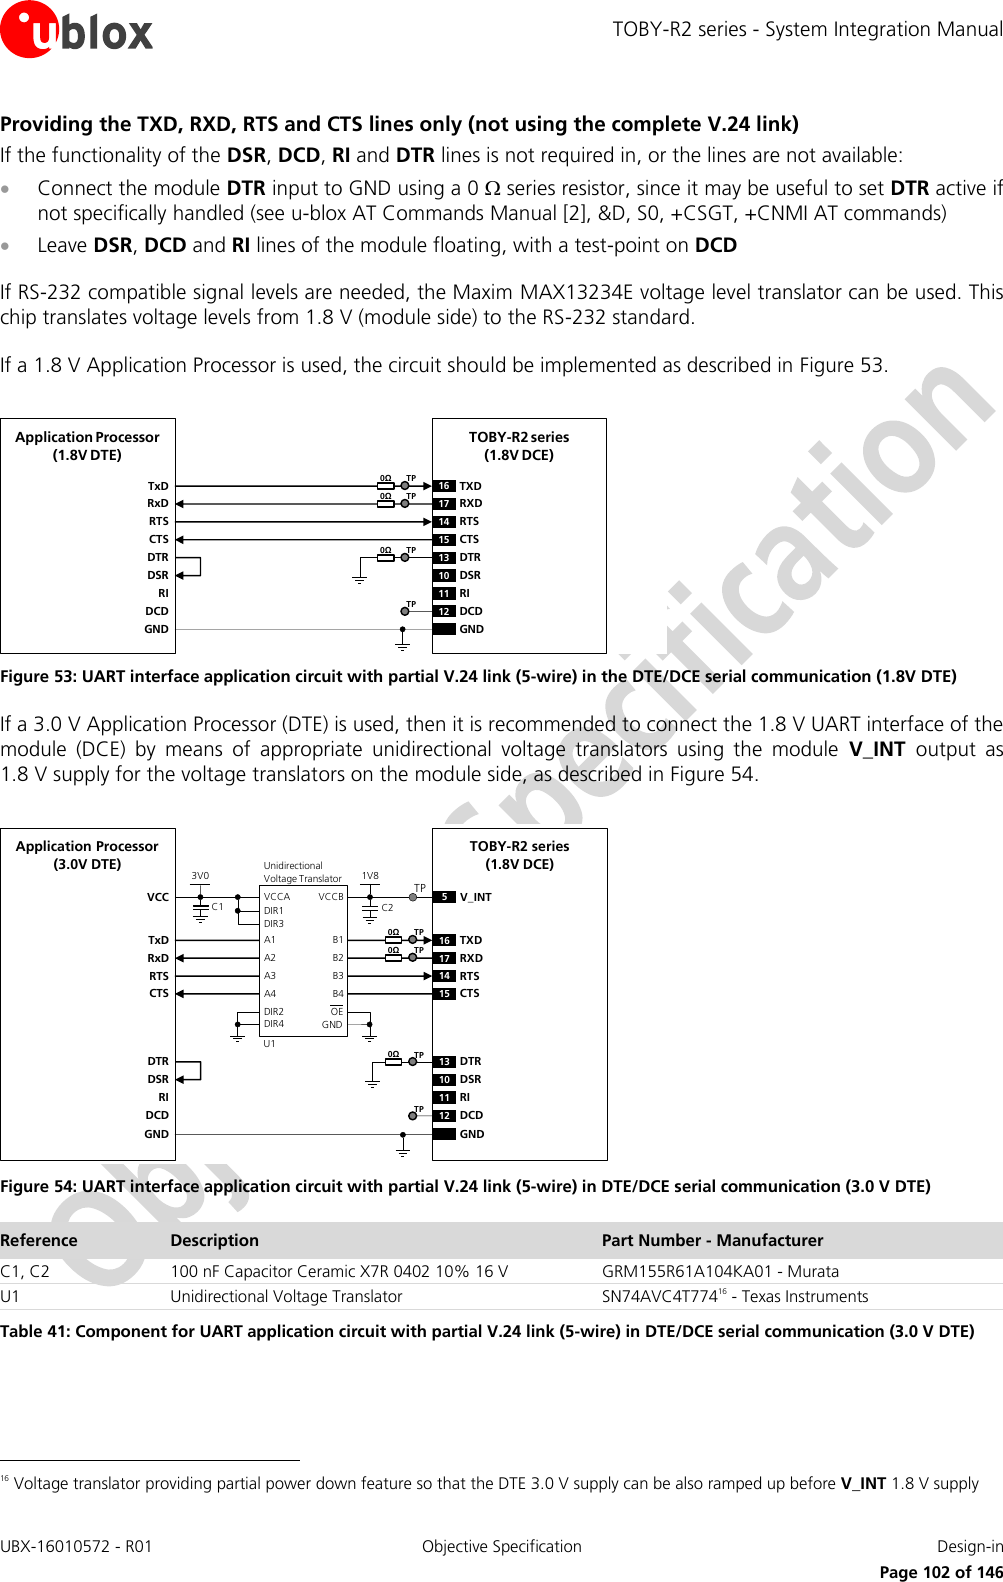 TOBY-R2 series - System Integration Manual UBX-16010572 - R01  Objective Specification  Design-in     Page 102 of 146 Providing the TXD, RXD, RTS and CTS lines only (not using the complete V.24 link) If the functionality of the DSR, DCD, RI and DTR lines is not required in, or the lines are not available:  Connect the module DTR input to GND using a 0  series resistor, since it may be useful to set DTR active if not specifically handled (see u-blox AT Commands Manual [2], &amp;D, S0, +CSGT, +CNMI AT commands)  Leave DSR, DCD and RI lines of the module floating, with a test-point on DCD  If RS-232 compatible signal levels are needed, the Maxim MAX13234E voltage level translator can be used. This chip translates voltage levels from 1.8 V (module side) to the RS-232 standard.  If a 1.8 V Application Processor is used, the circuit should be implemented as described in Figure 53.  TxDApplication Processor(1.8V DTE)RxDRTSCTSDTRDSRRIDCDGNDTOBY-R2 series (1.8V DCE)16 TXD13 DTR17 RXD14 RTS15 CTS10 DSR11 RI12 DCDGND0ΩTP0ΩTP0ΩTPTP Figure 53: UART interface application circuit with partial V.24 link (5-wire) in the DTE/DCE serial communication (1.8V DTE) If a 3.0 V Application Processor (DTE) is used, then it is recommended to connect the 1.8 V UART interface of the module  (DCE)  by  means  of  appropriate  unidirectional  voltage  translators  using  the  module  V_INT  output  as 1.8 V supply for the voltage translators on the module side, as described in Figure 54.  5V_INTTxDApplication Processor(3.0V DTE)RxDRTSCTSDTRDSRRIDCDGNDTOBY-R2 series (1.8V DCE)16 TXD13 DTR17 RXD14 RTS15 CTS10 DSR11 RI12 DCDGND1V8B1 A1GNDU1B3A3VCCBVCCAUnidirectionalVoltage TranslatorC1 C23V0DIR3DIR2 OEDIR1VCCB2 A2B4A4DIR4TP0ΩTP0ΩTP0ΩTPTP Figure 54: UART interface application circuit with partial V.24 link (5-wire) in DTE/DCE serial communication (3.0 V DTE) Reference Description Part Number - Manufacturer C1, C2 100 nF Capacitor Ceramic X7R 0402 10% 16 V GRM155R61A104KA01 - Murata U1 Unidirectional Voltage Translator SN74AVC4T77416 - Texas Instruments Table 41: Component for UART application circuit with partial V.24 link (5-wire) in DTE/DCE serial communication (3.0 V DTE)                                                        16 Voltage translator providing partial power down feature so that the DTE 3.0 V supply can be also ramped up before V_INT 1.8 V supply 